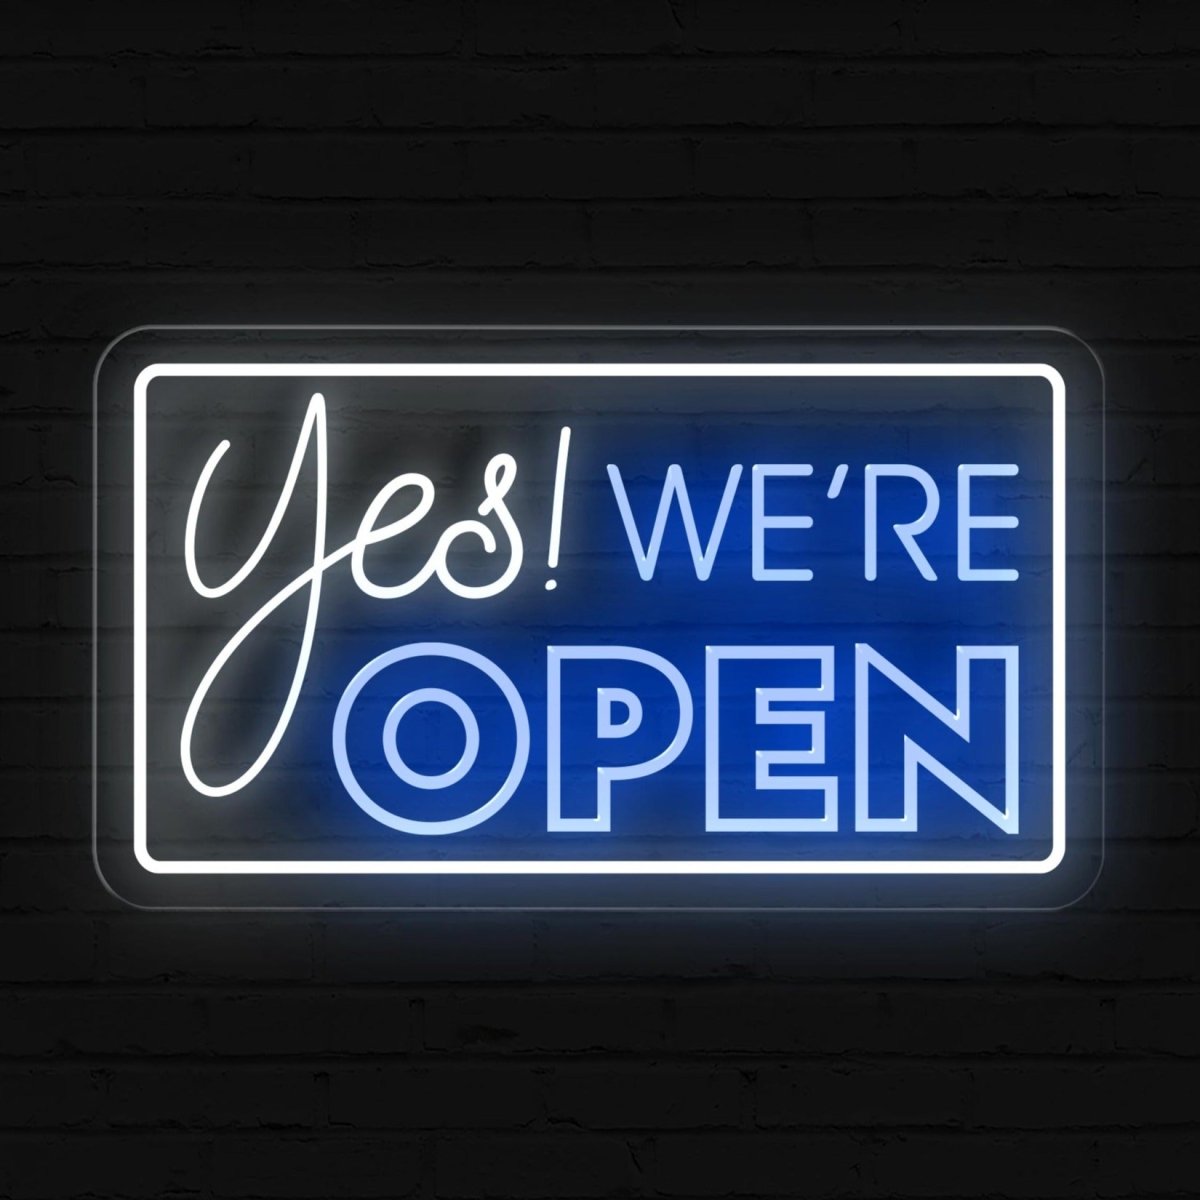 Yes! We're Open Neon Sign - Bright LED Light Welcome for Your Business - NEONXPERT